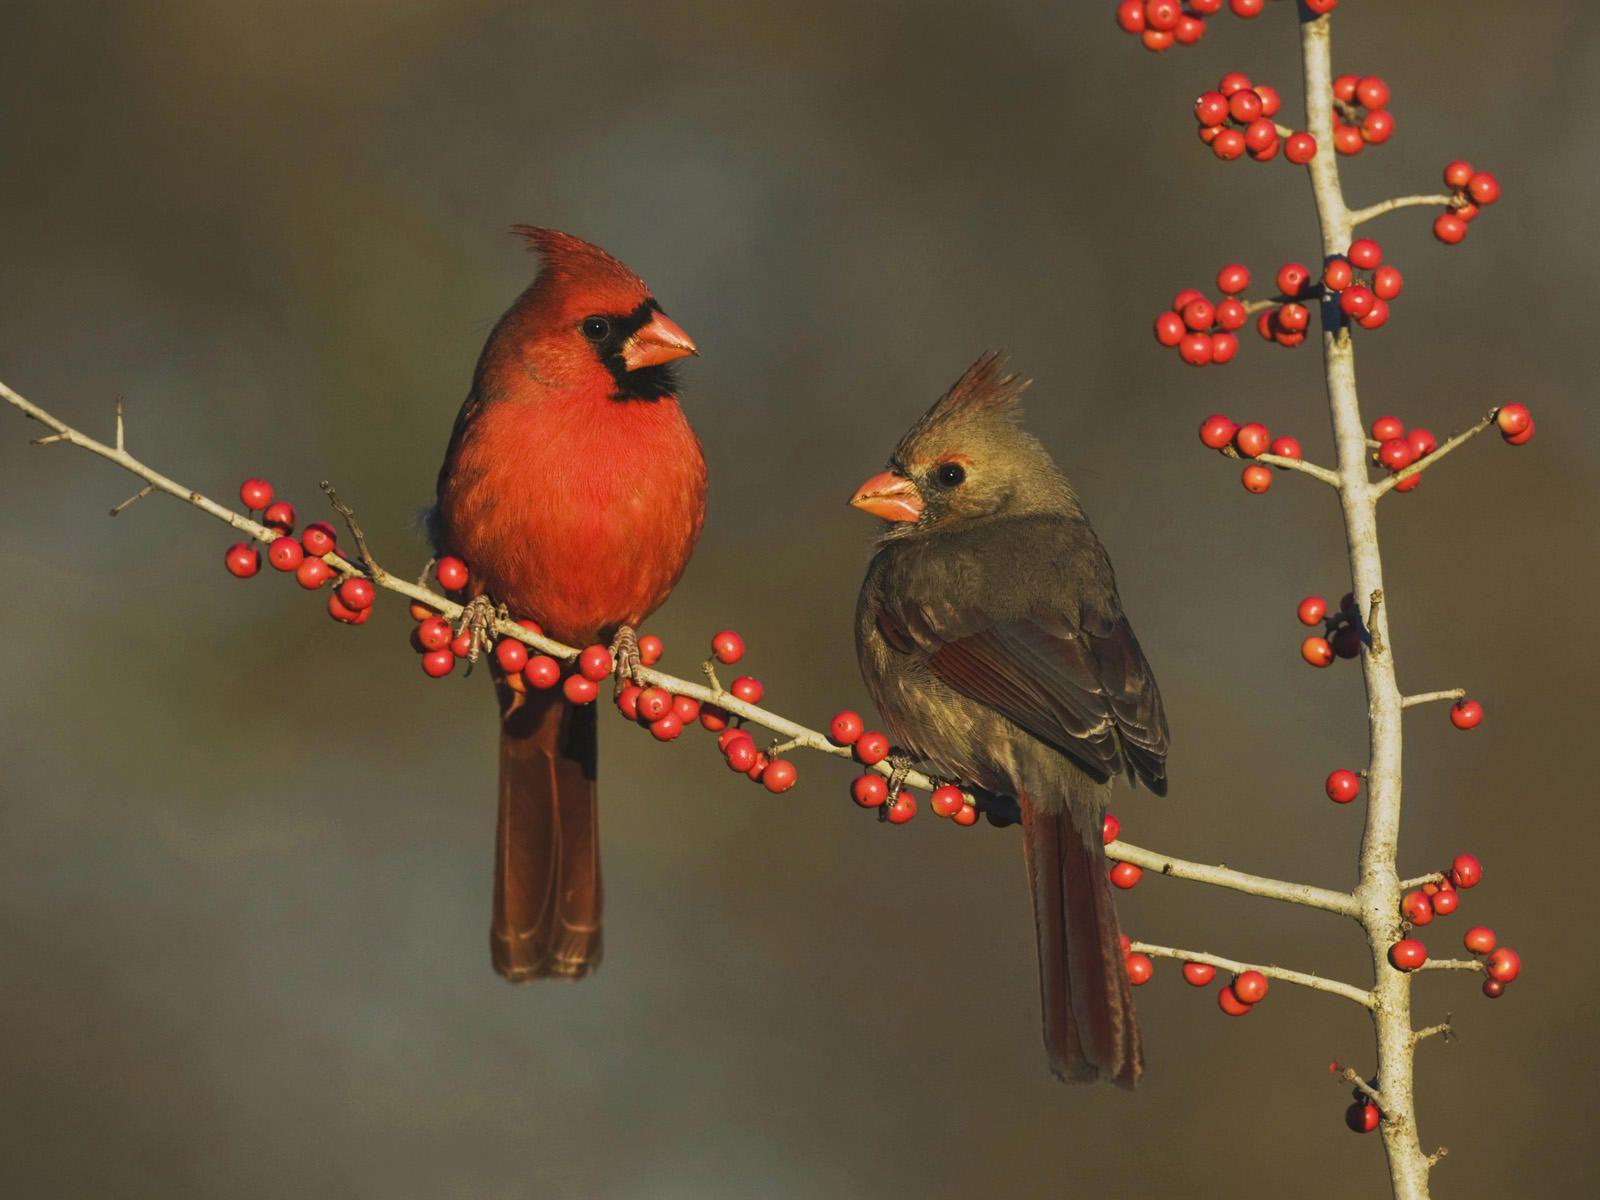 A very distinguished couple on my favorite tree - the holly tree